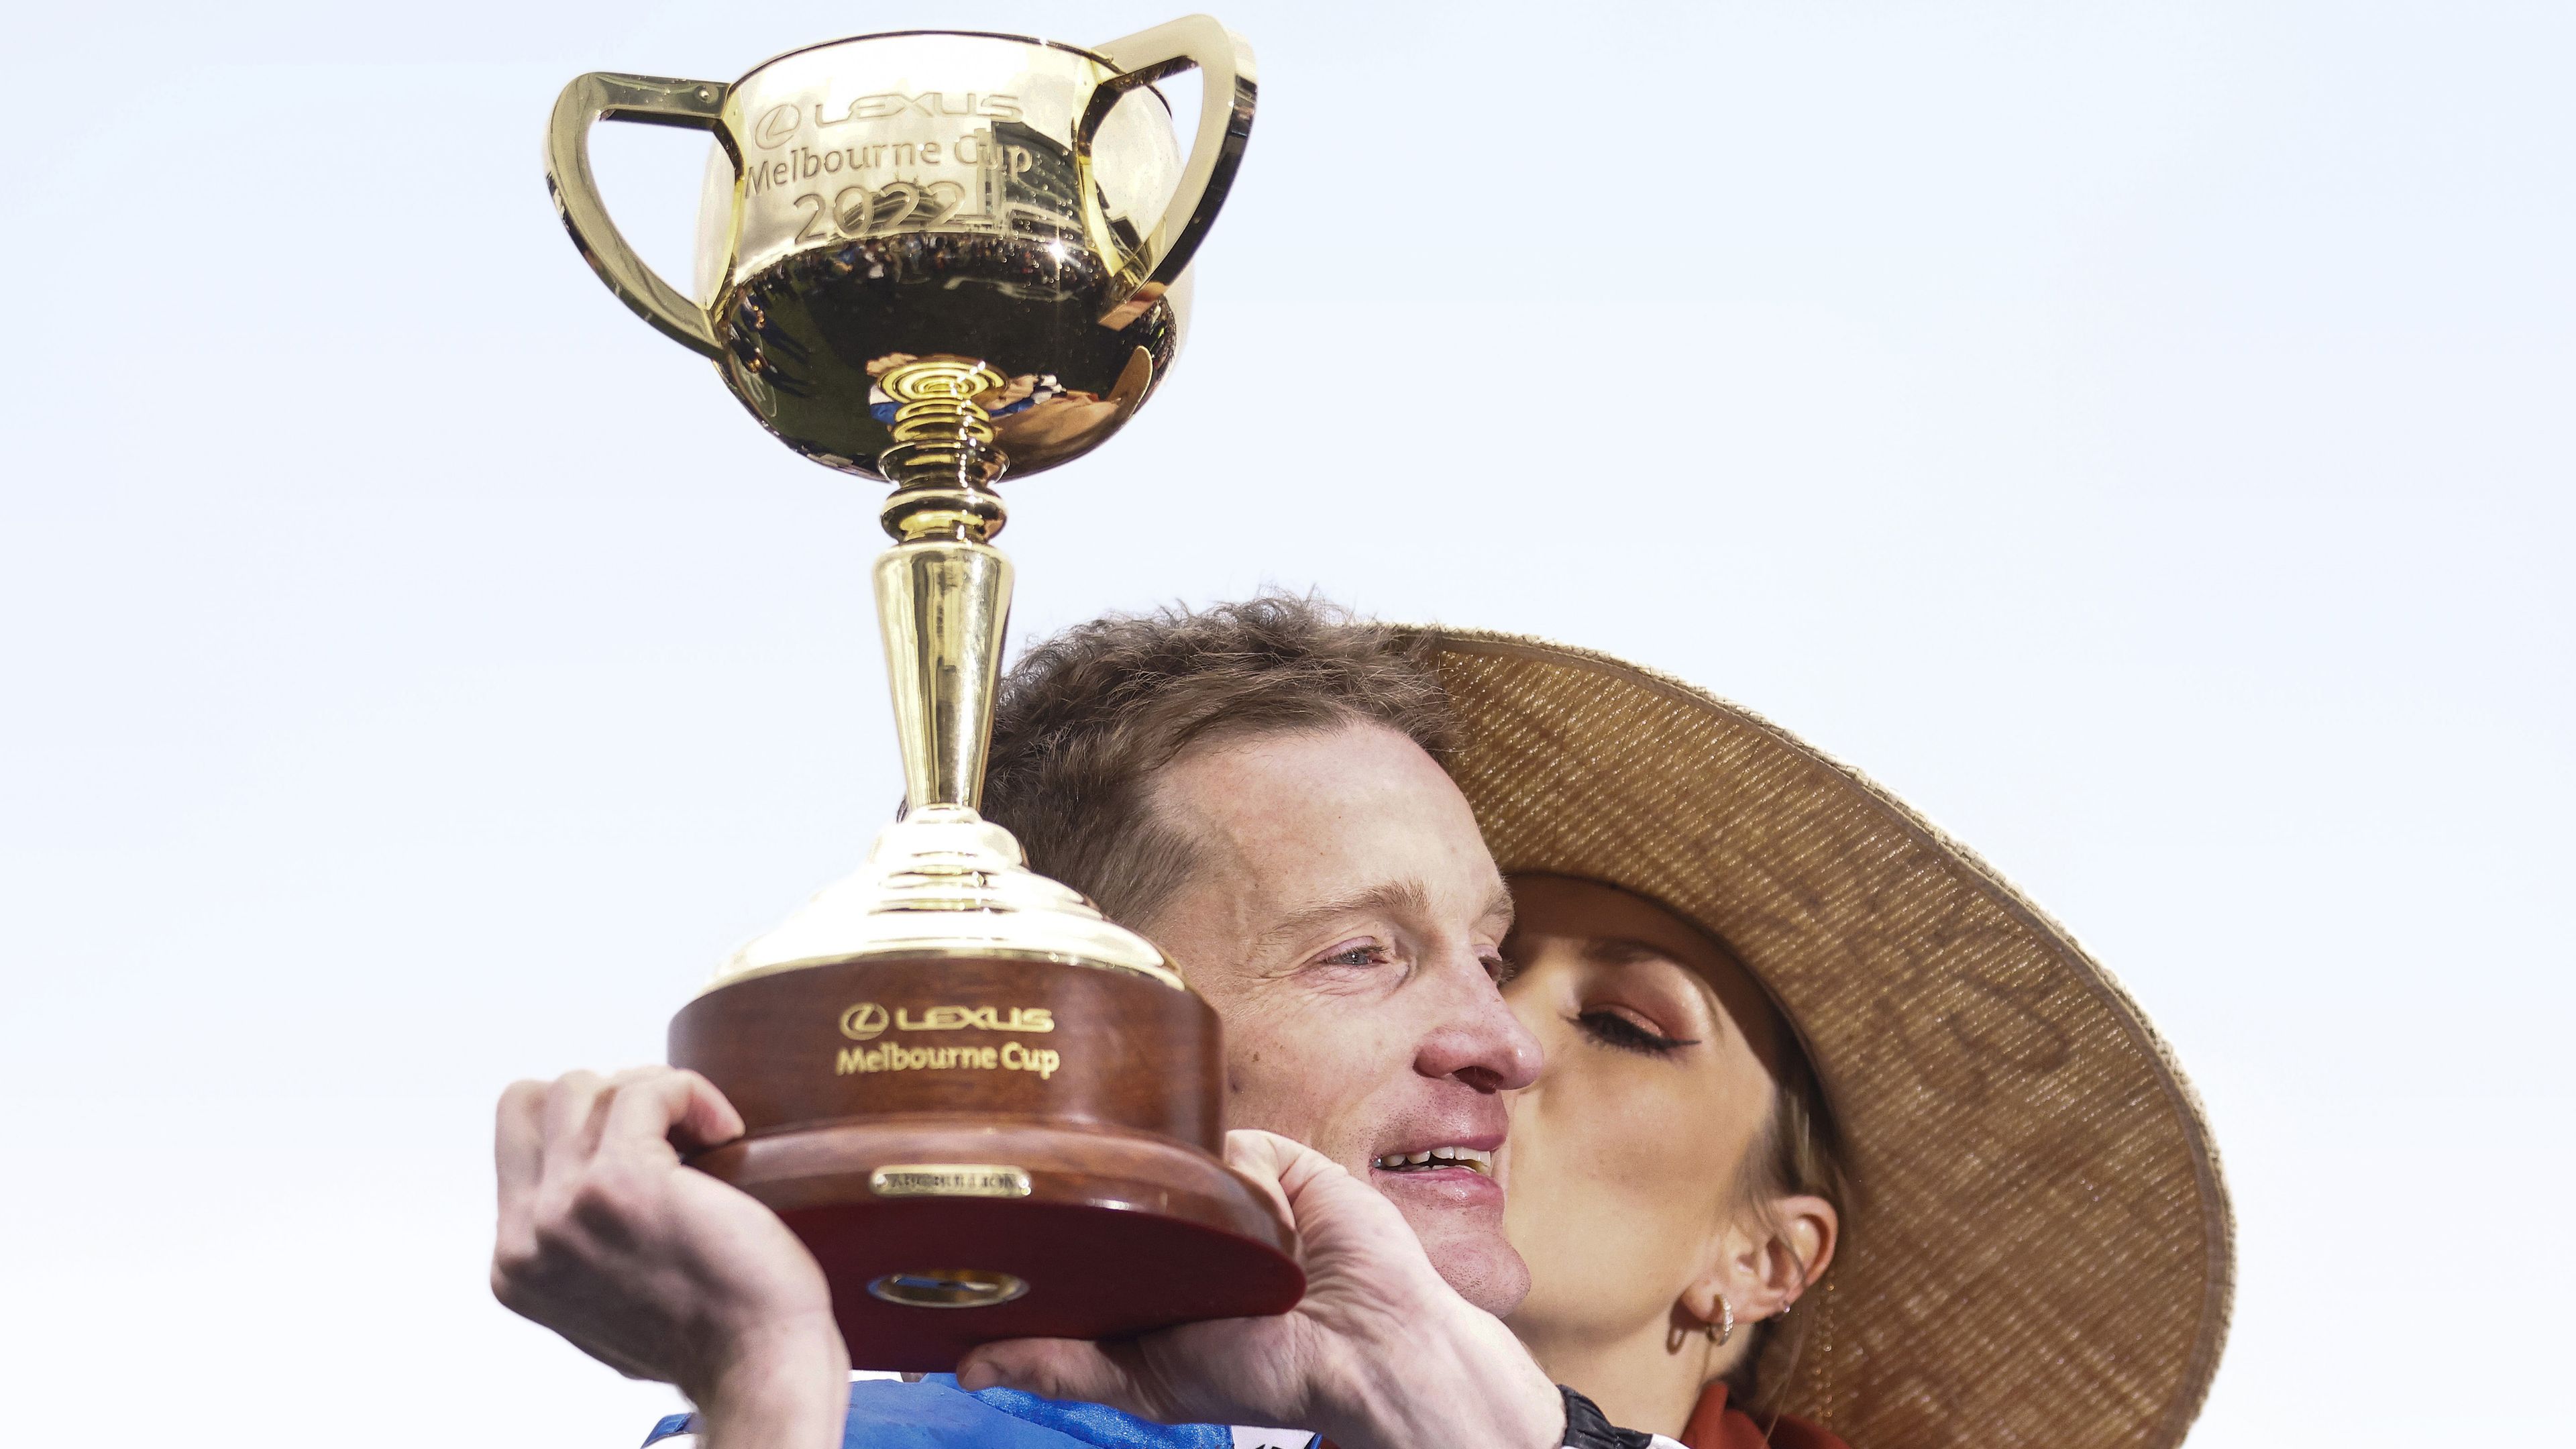 Mark Zahra, who rode Gold Trip to victory, celebrates with the trophy after winning the 2022 Melbourne Cup.